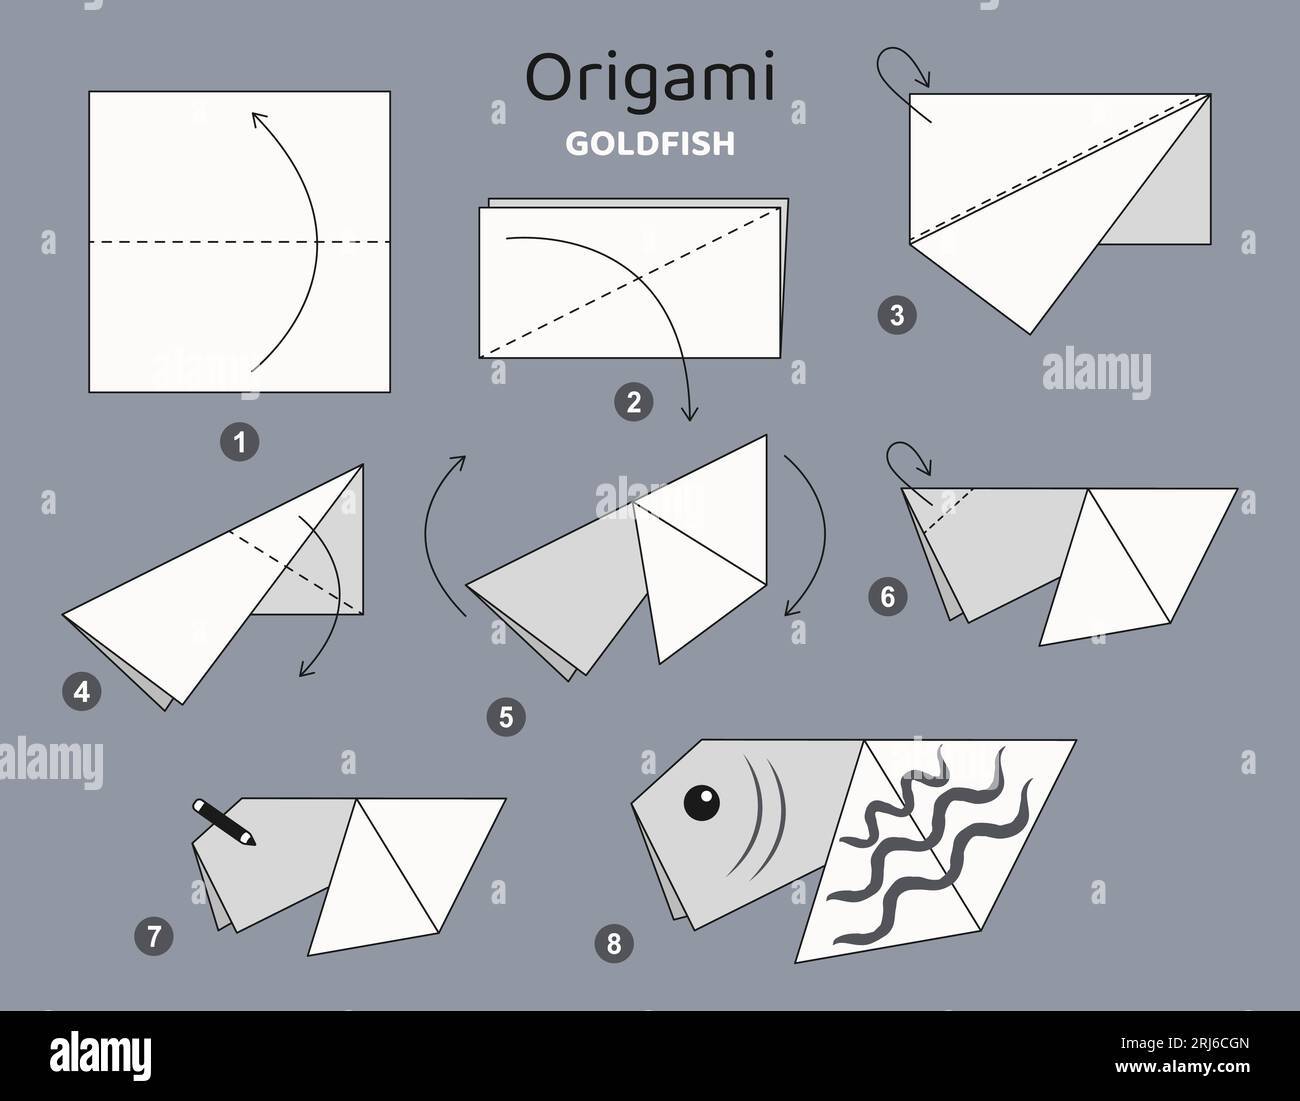 Fish origami scheme tutorial moving model. Origami for kids. Step